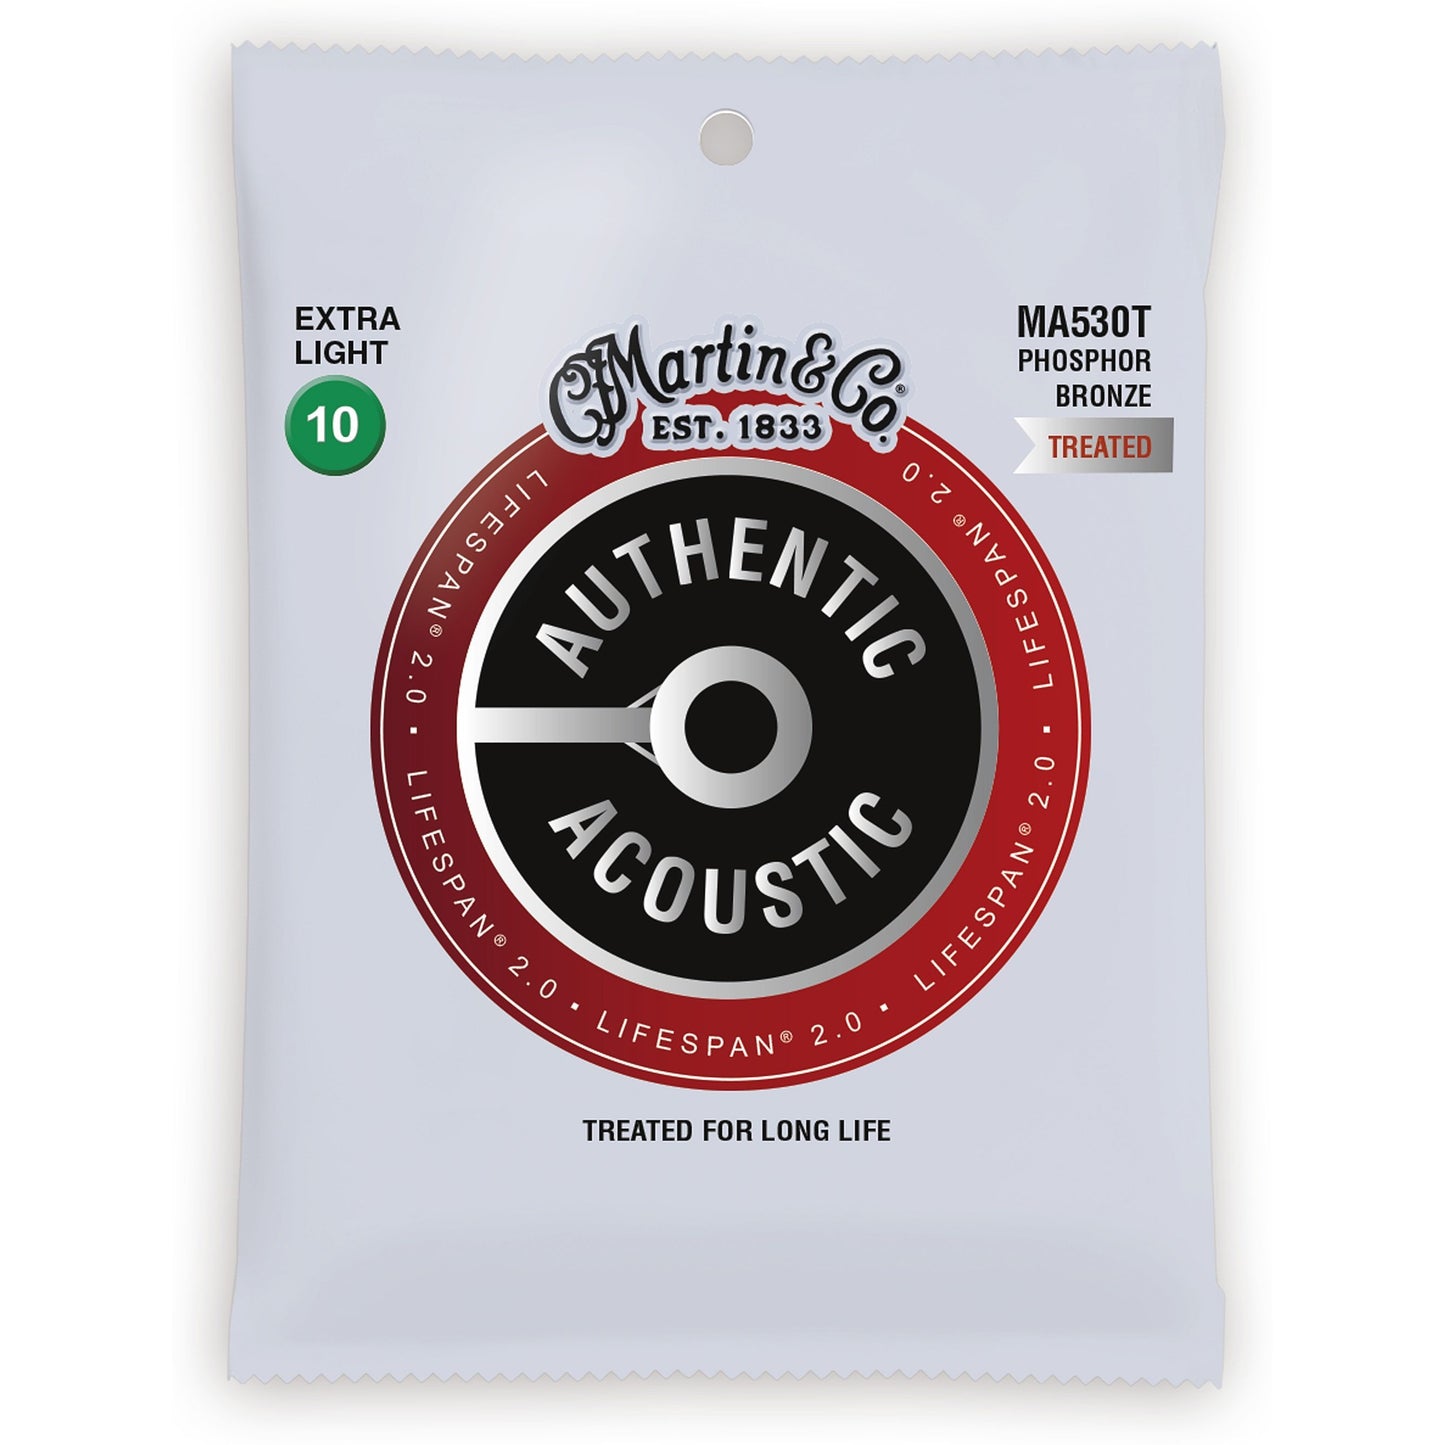 Martin Authentic Lifespan 2.0 Treated Phosphor Bronze Acoustic Guitar Strings, MA530T, Extra Light